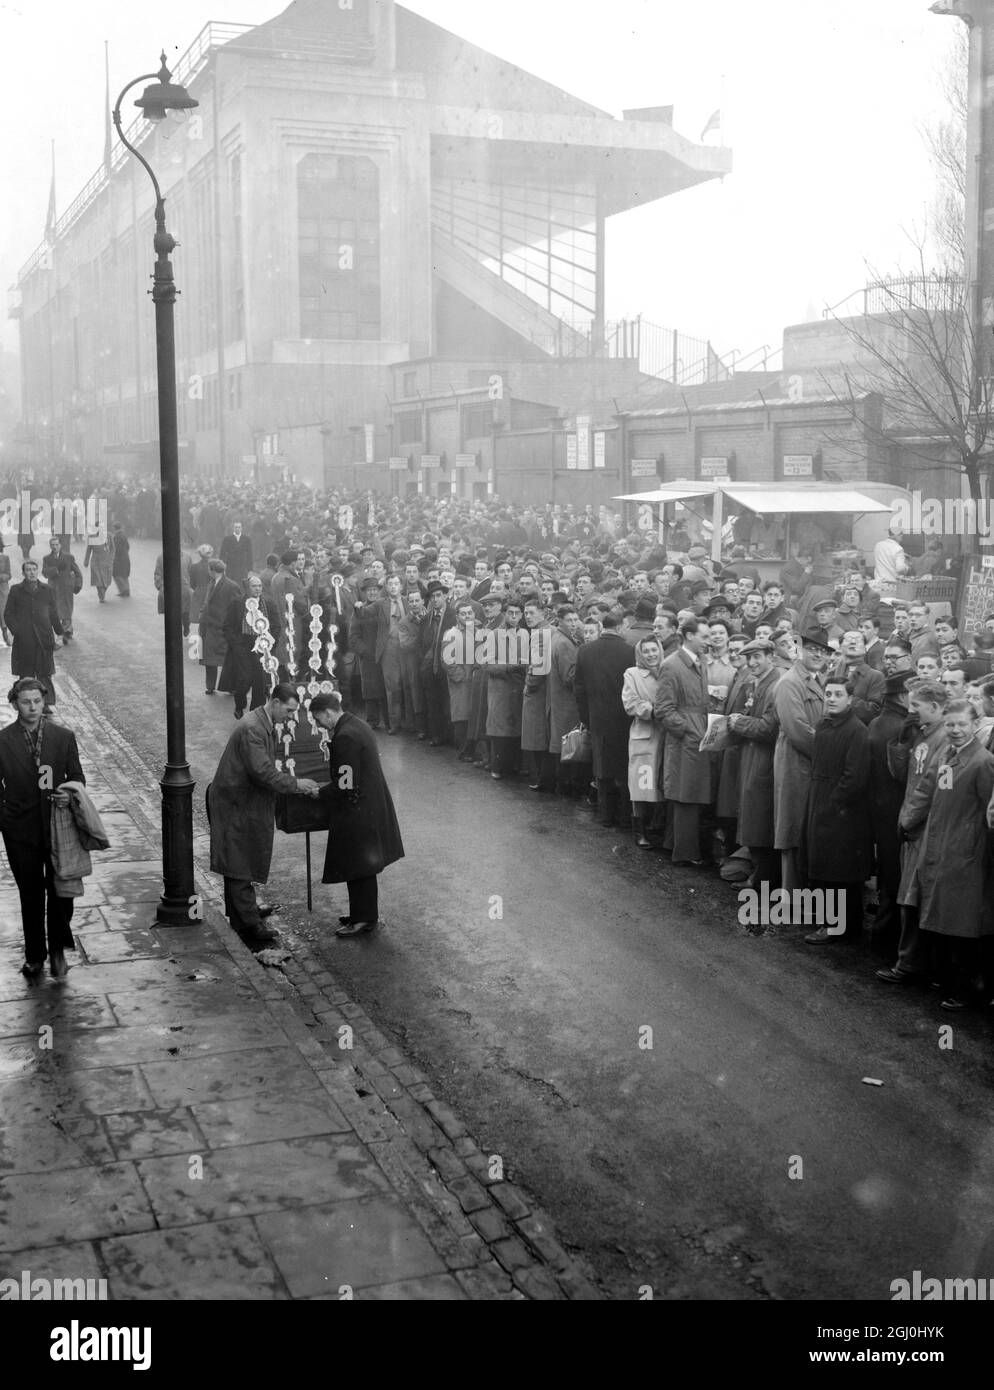 At an early hour this morning large crowds had already gathered at Arsenal Football Ground, Highbury London for today's 1st Round Cup battle between Arsenal and Tottenham Hotspurs, the first time these two teams have met in a Cup game beginning to collect at 8 o'clock this morning 8 January 1949 Stock Photo